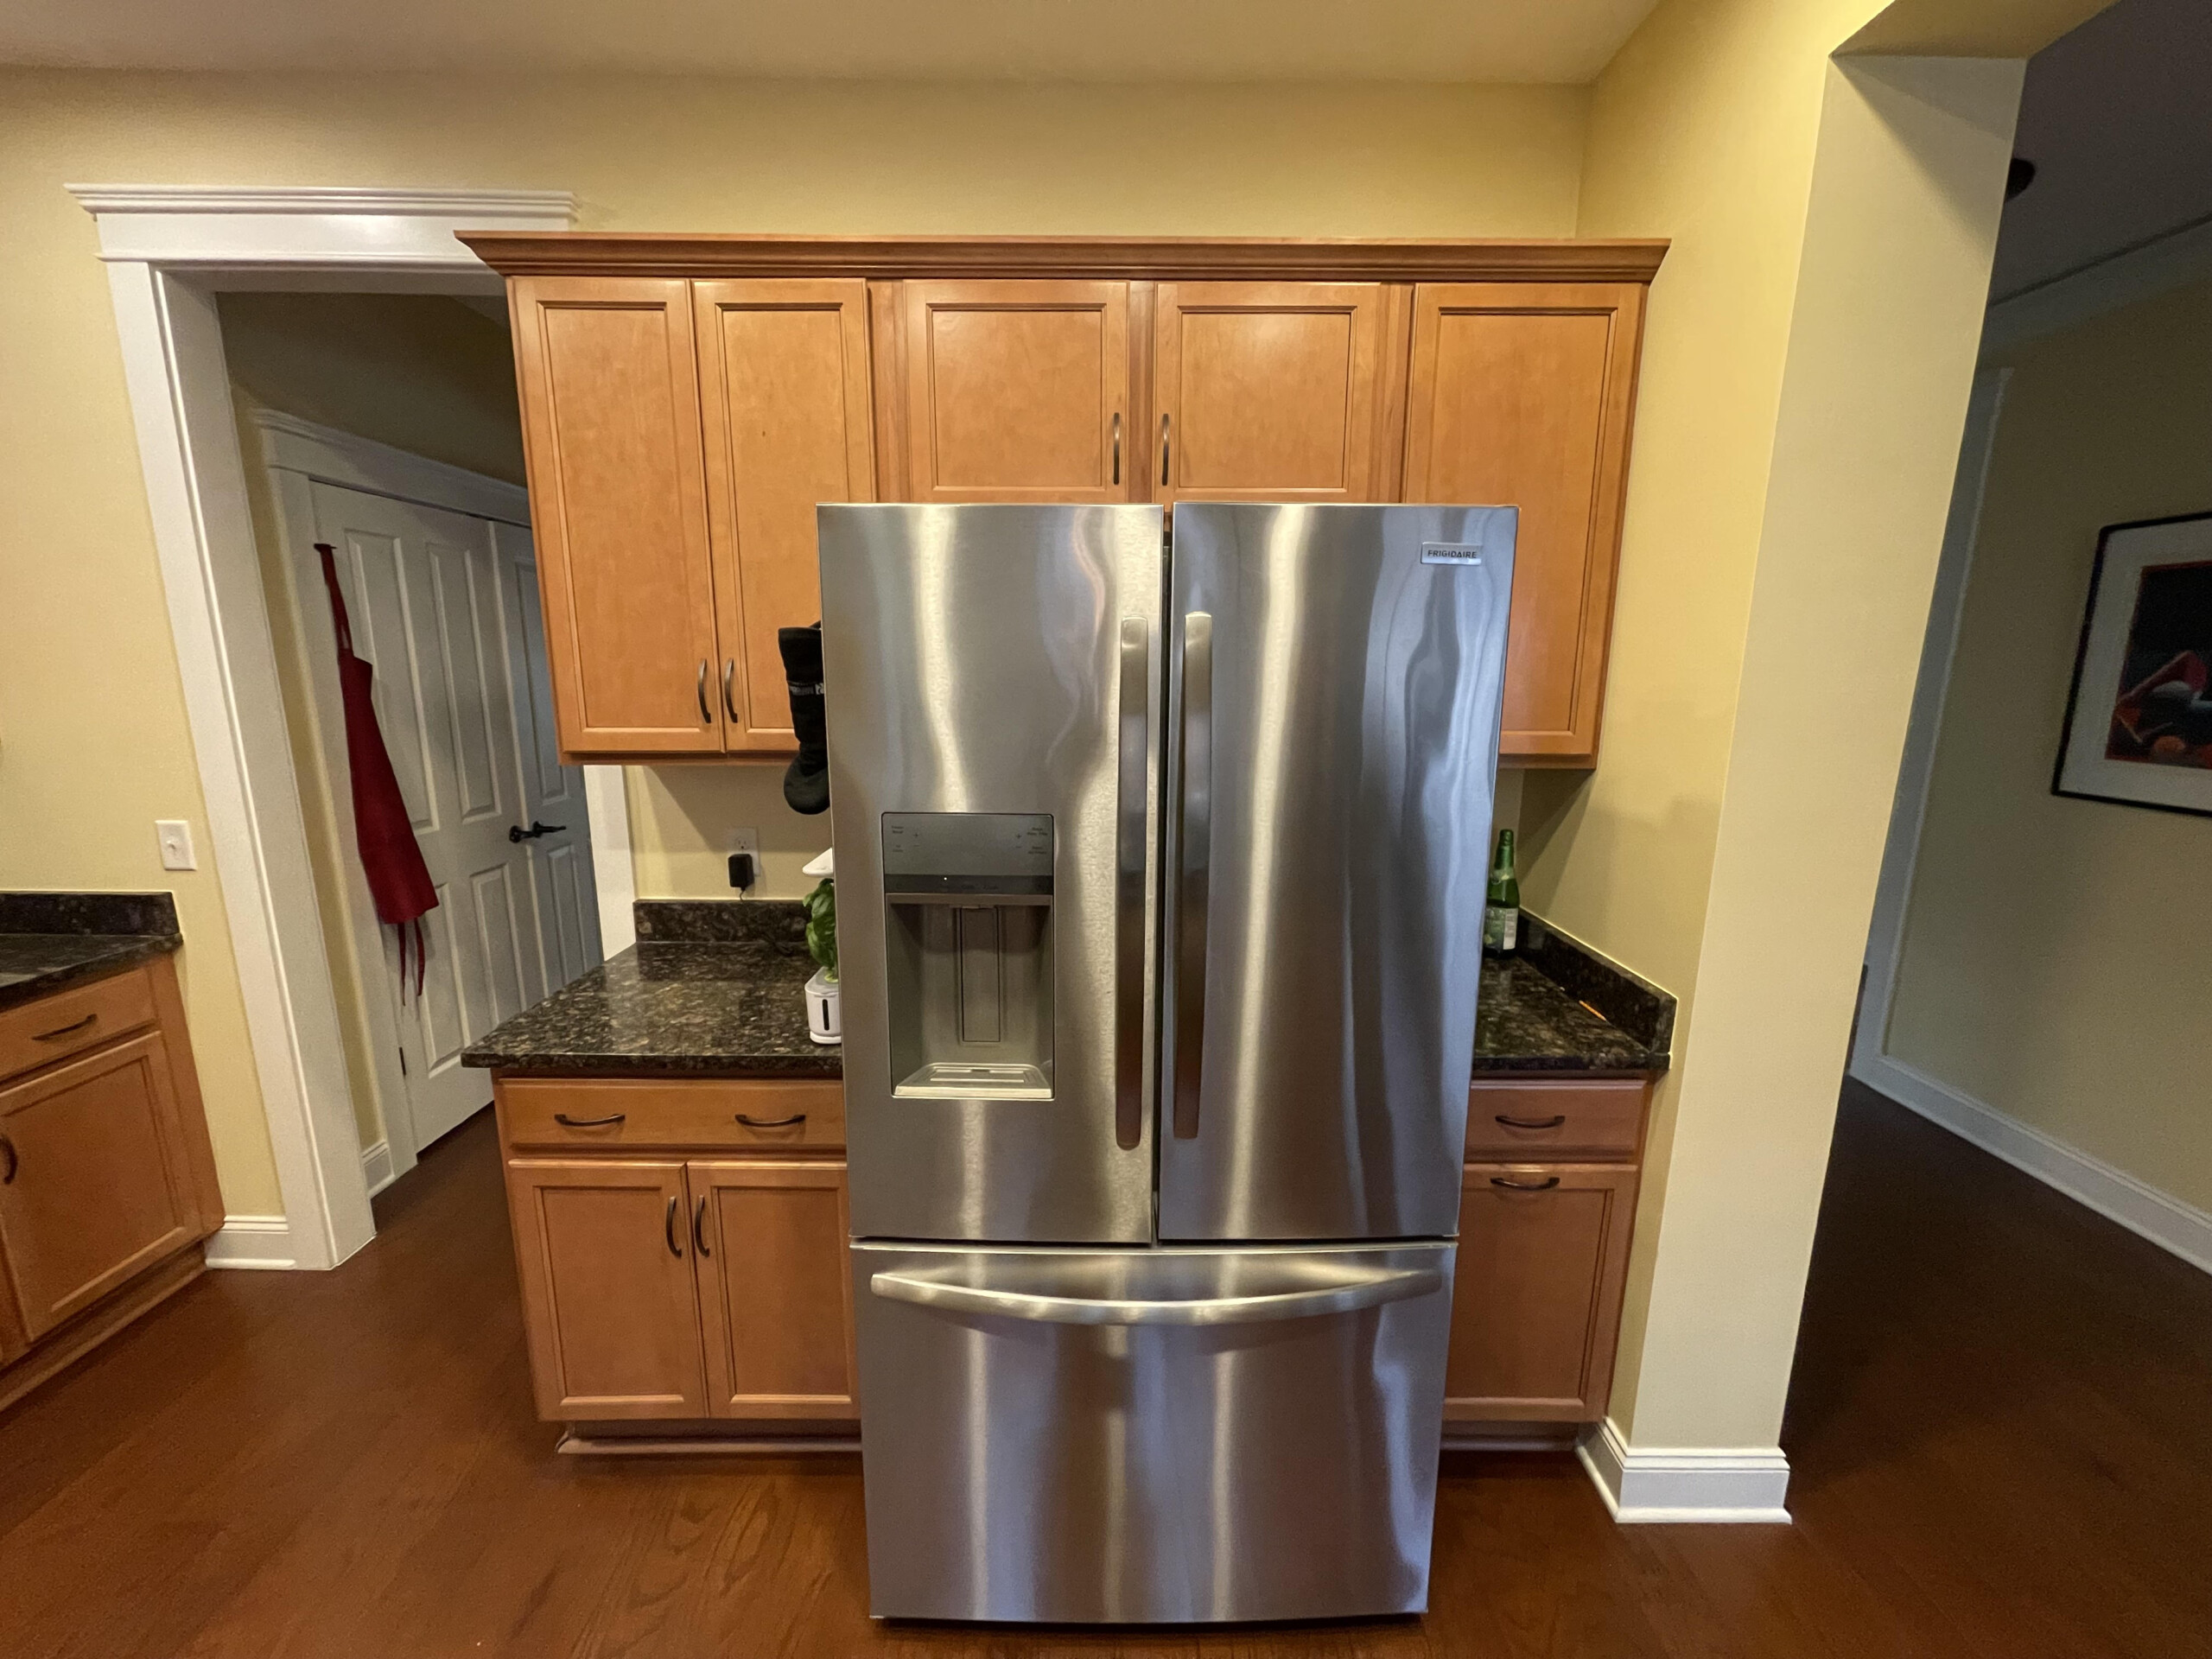 brown kitchen cabinets with a silver fridge